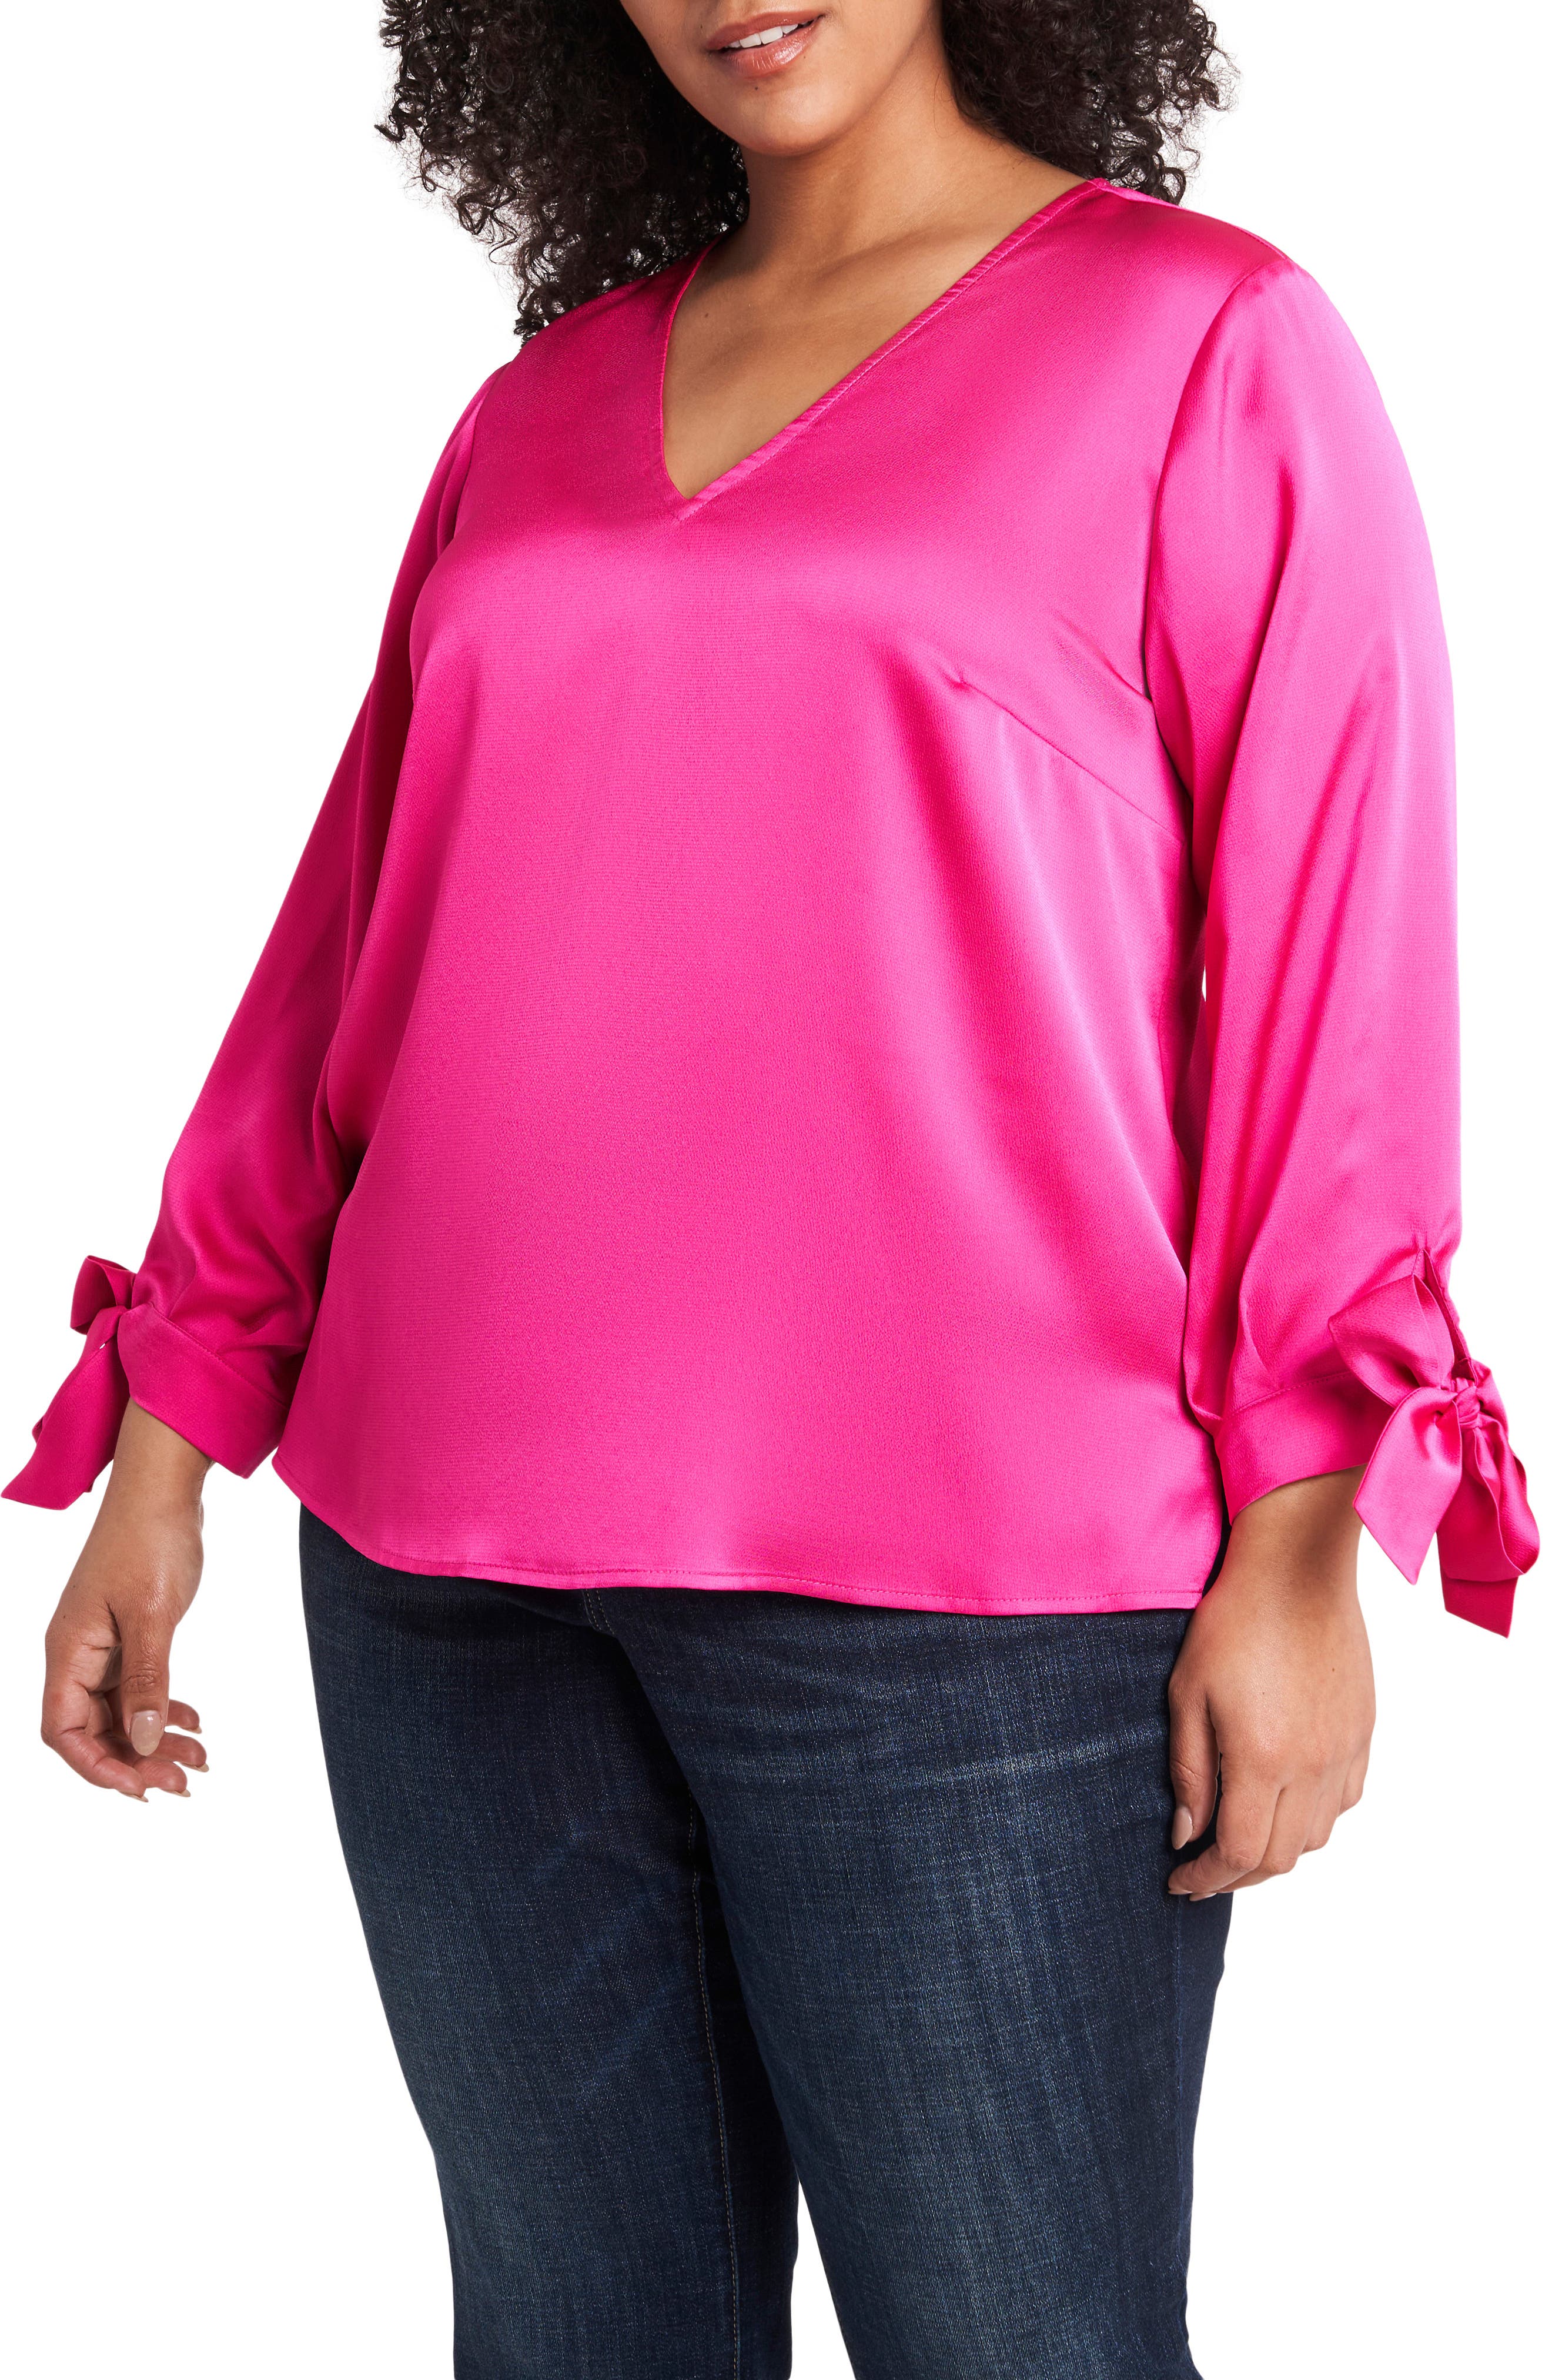 Pink Plus-Size Tops for Women | Nordstrom